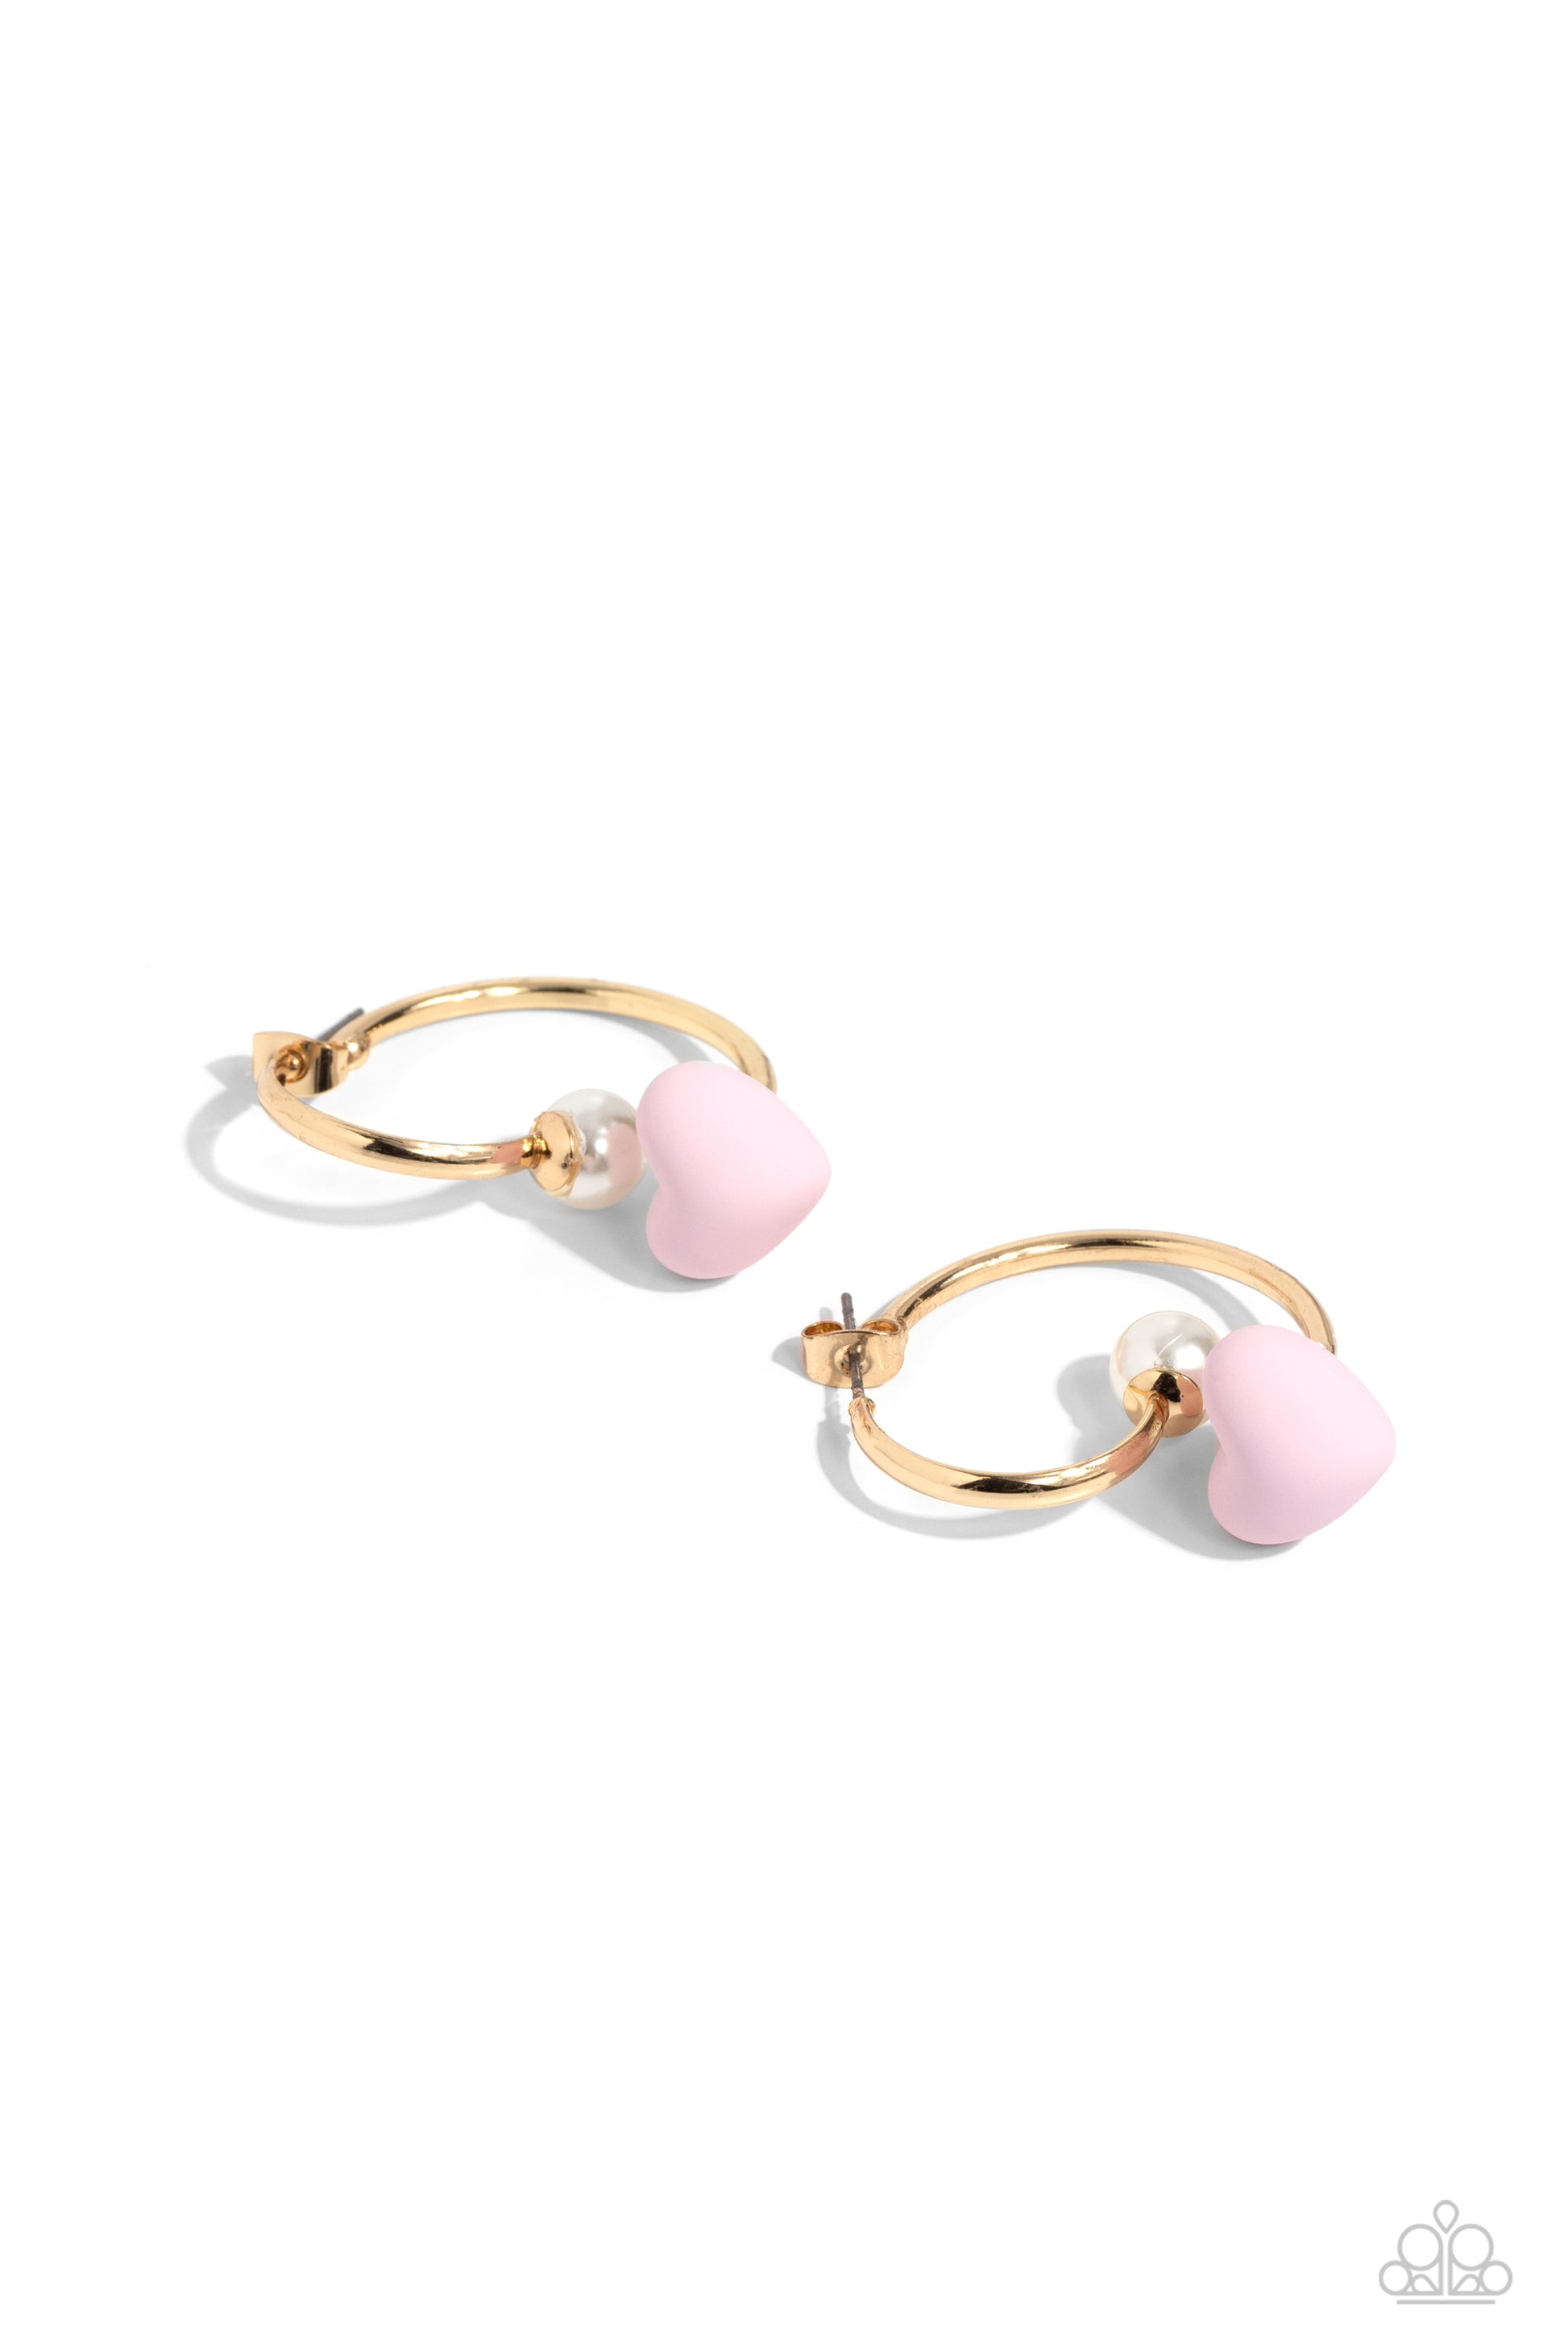 Romantic Representative Pink Heart Jacket Earring - Paparazzi Accessories  A solitaire white pearl attaches to a double-sided gold post, designed to fasten behind the ear. Dotted with a light pink acrylic heart, the double-sided post peeks out beneath the ear for a romantic look. Hoop measures approximately 1" in diameter.  Sold as one pair of double-sided hoop earrings.  SKU: P5HO-PKXX-064XX